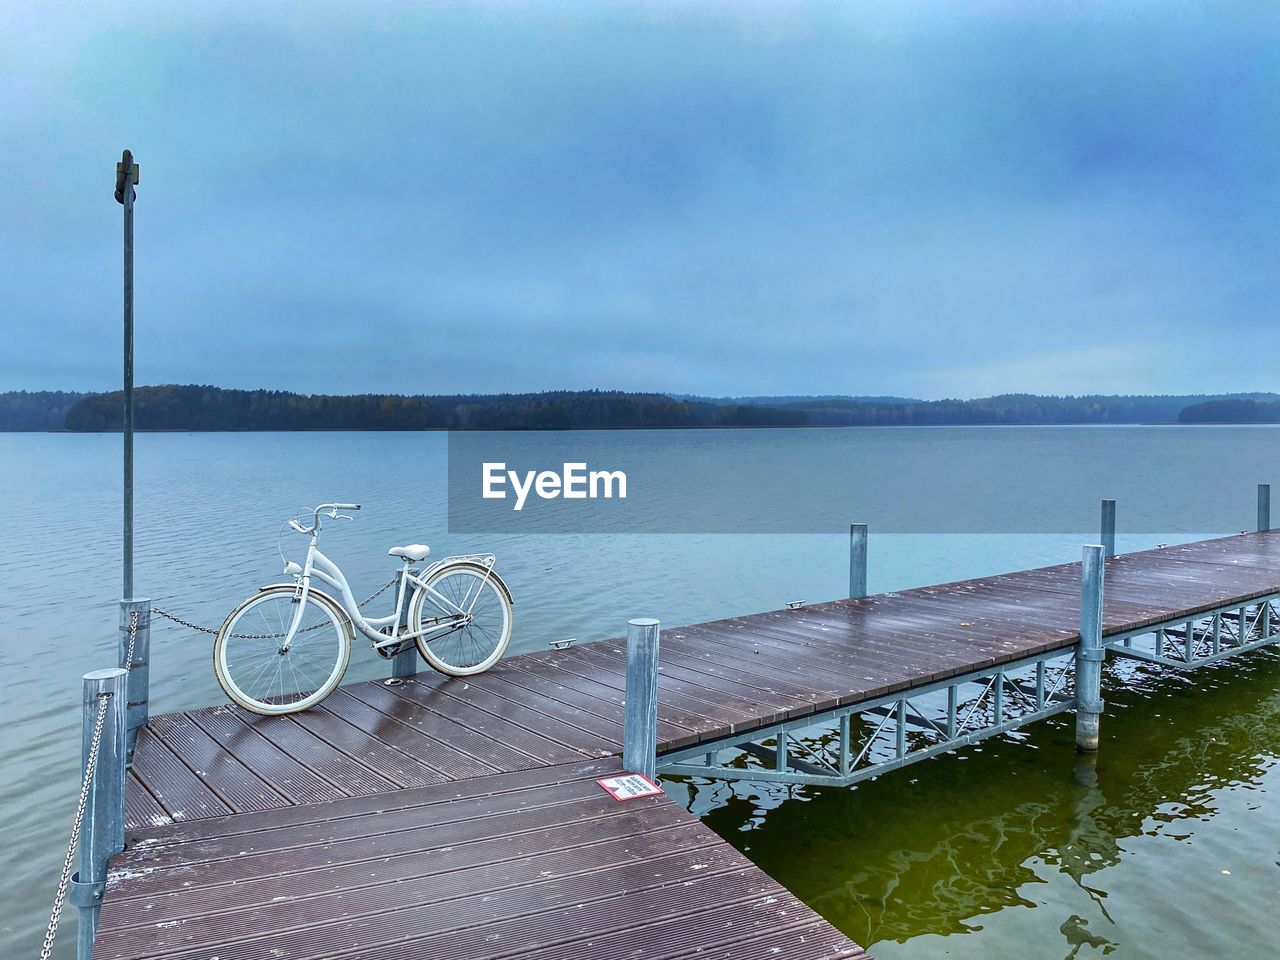 water, bicycle, transportation, vehicle, sky, nature, sea, tranquility, pier, no people, scenics - nature, beauty in nature, tranquil scene, mode of transportation, shore, day, travel, cloud, wood, architecture, environment, dock, beach, outdoors, bicycle wheel, coast, bay, land, travel destinations, railing, absence, jetty, nautical vessel, idyllic, landscape, non-urban scene